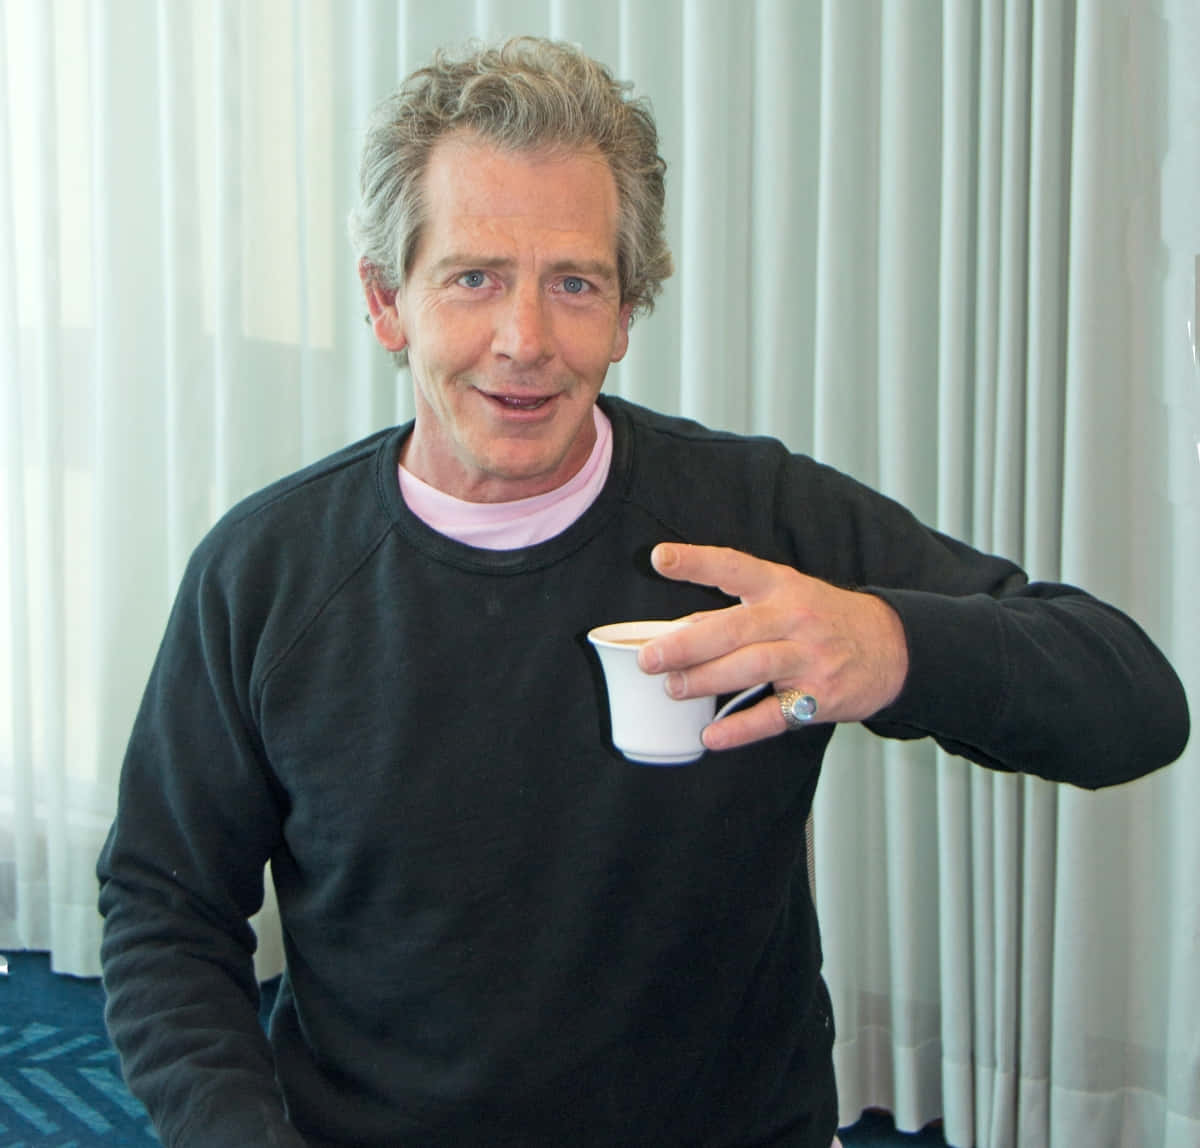 Ben Mendelsohn Casual Portrait With Coffee Cup Background